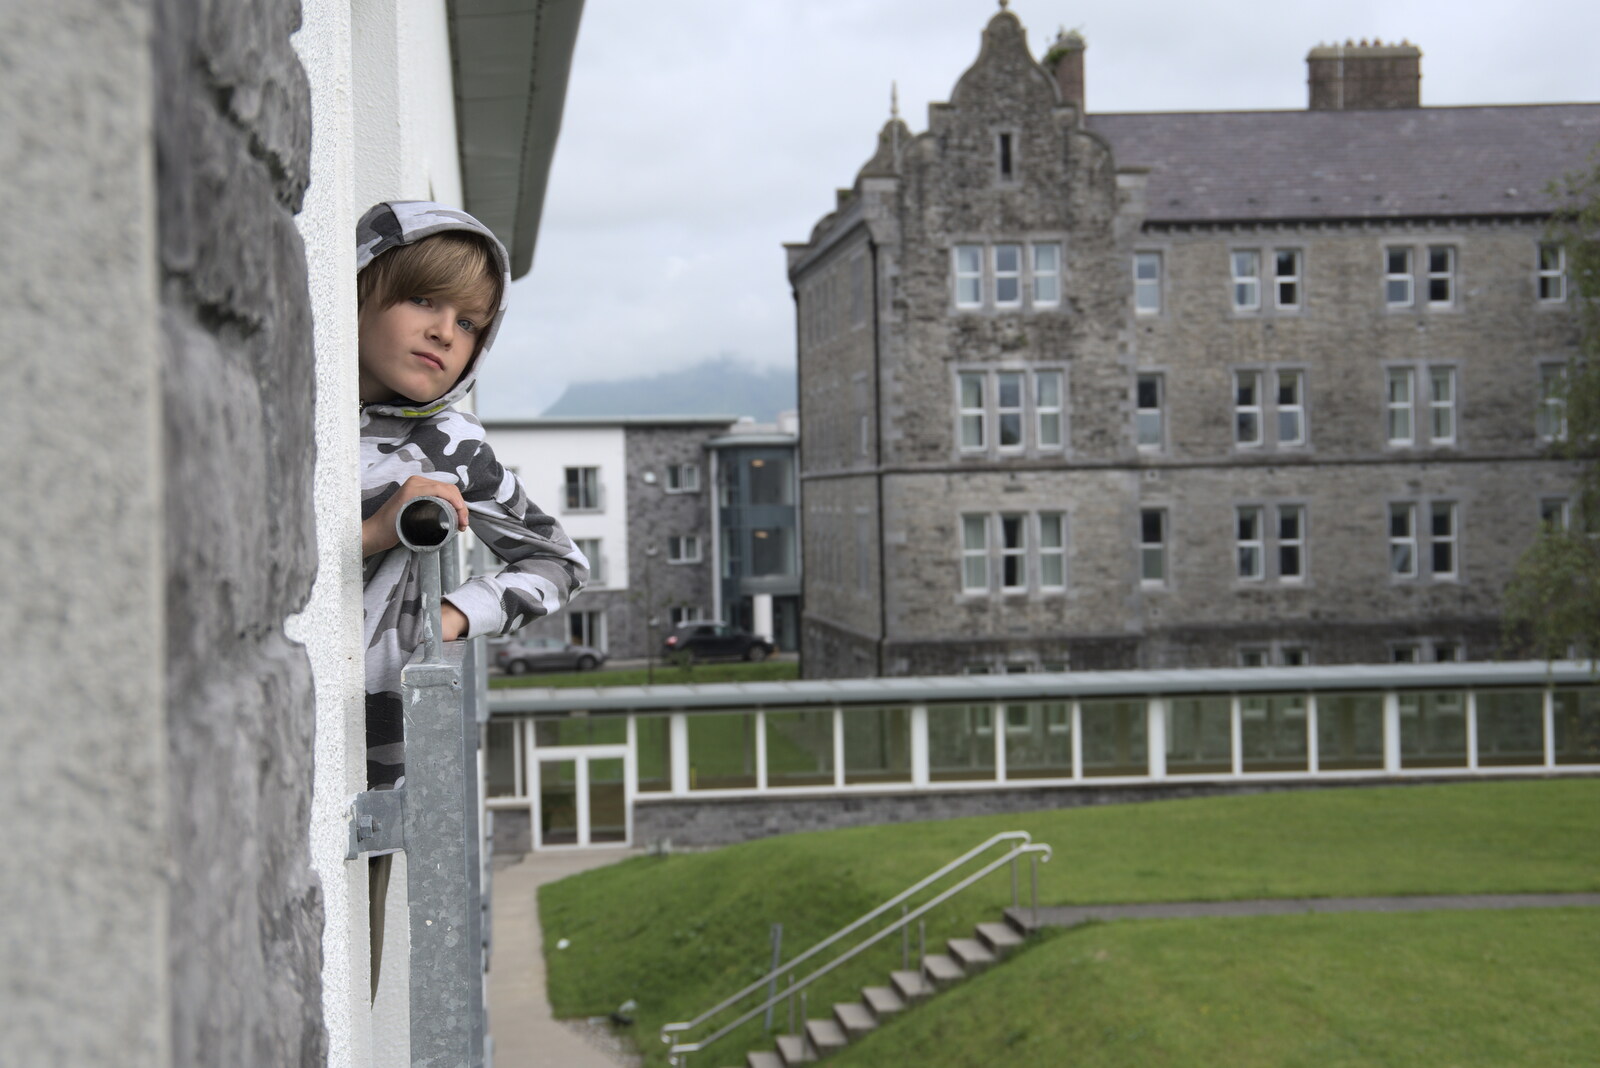 A Trip to Manorhamilton, County Leitrim, Ireland - 11th August 2021: Harry looks out of the lounge window